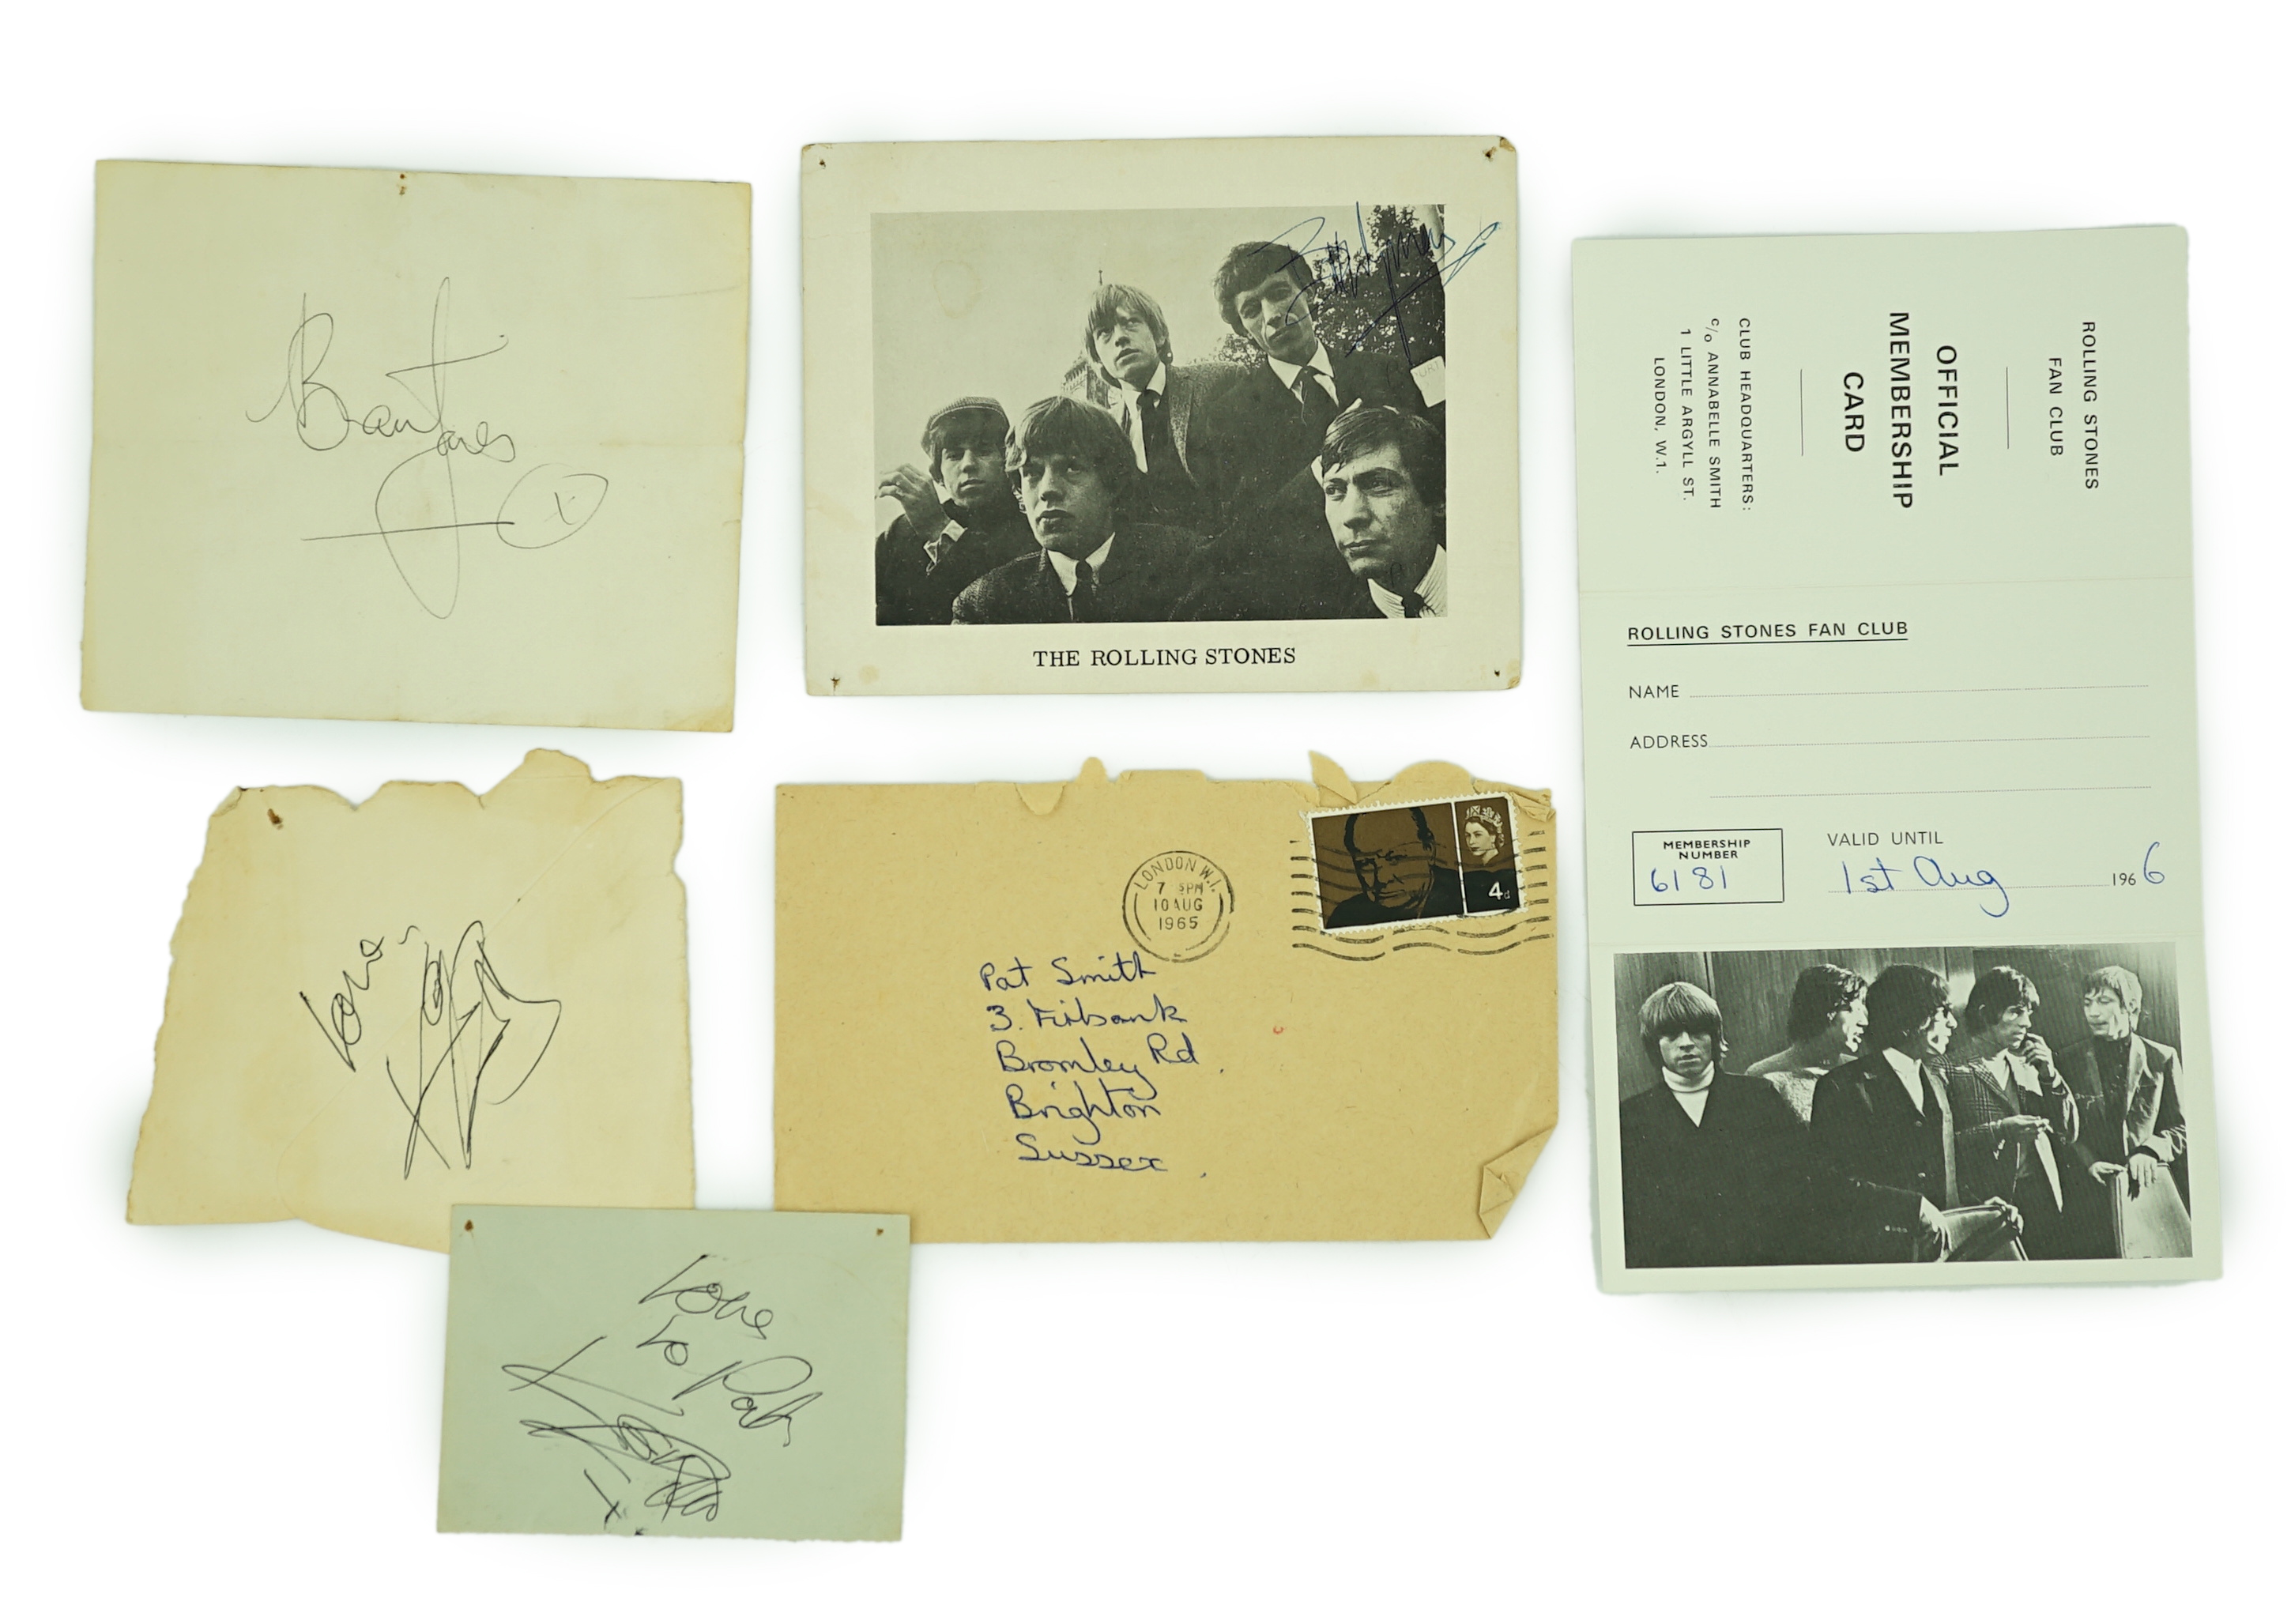 A Rolling Stones collection including autographs, all personally collected by the vendor in the mid-1960s